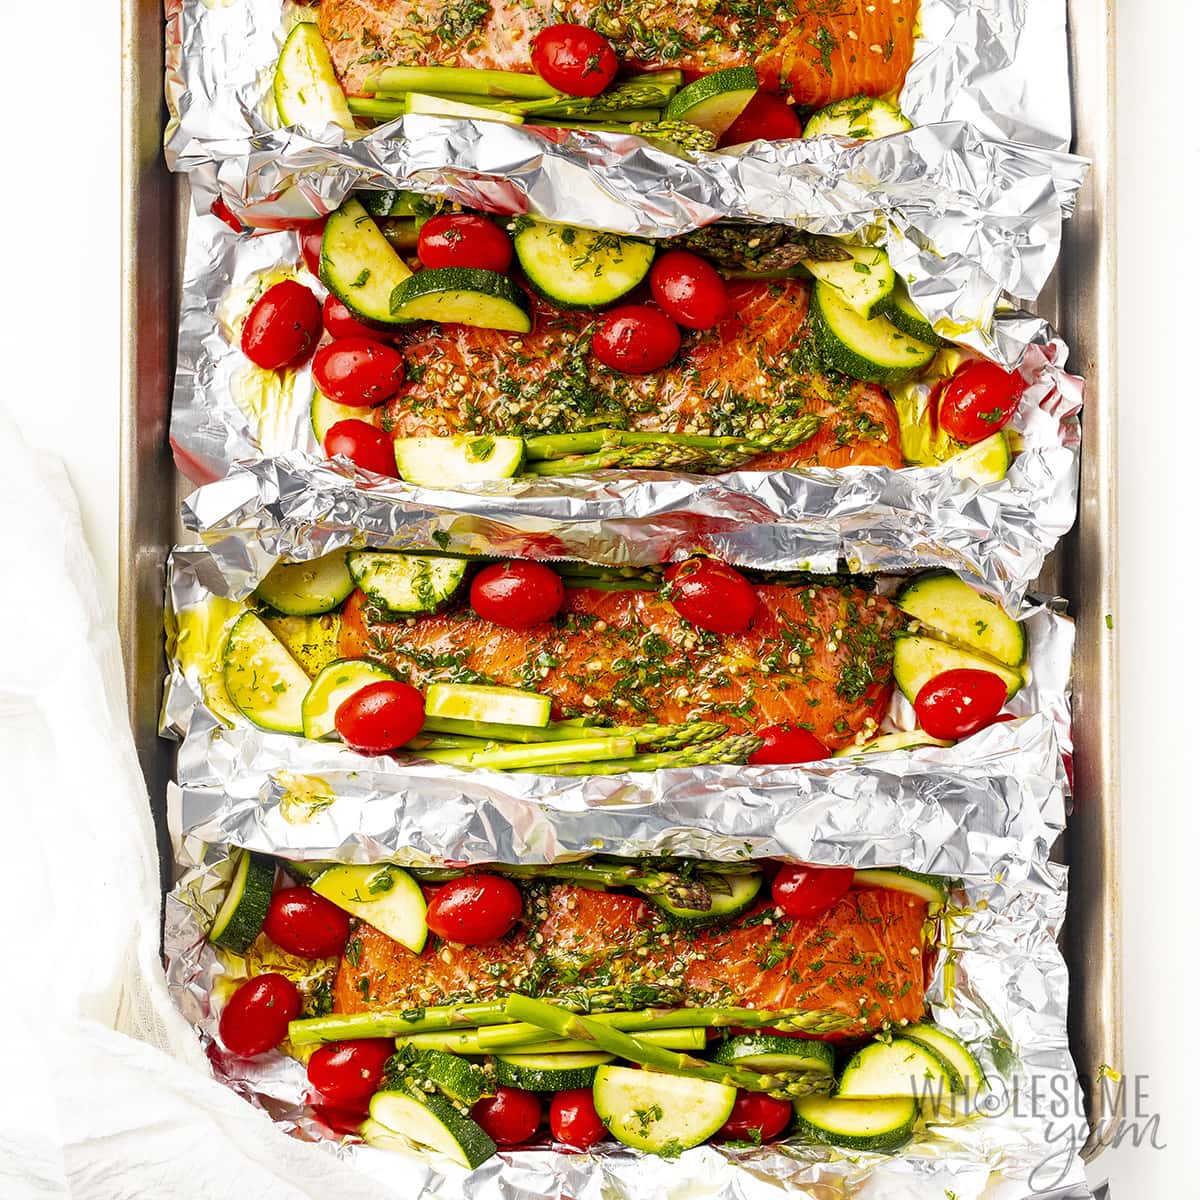 Seasoned raw salmon and vegetables in foil.